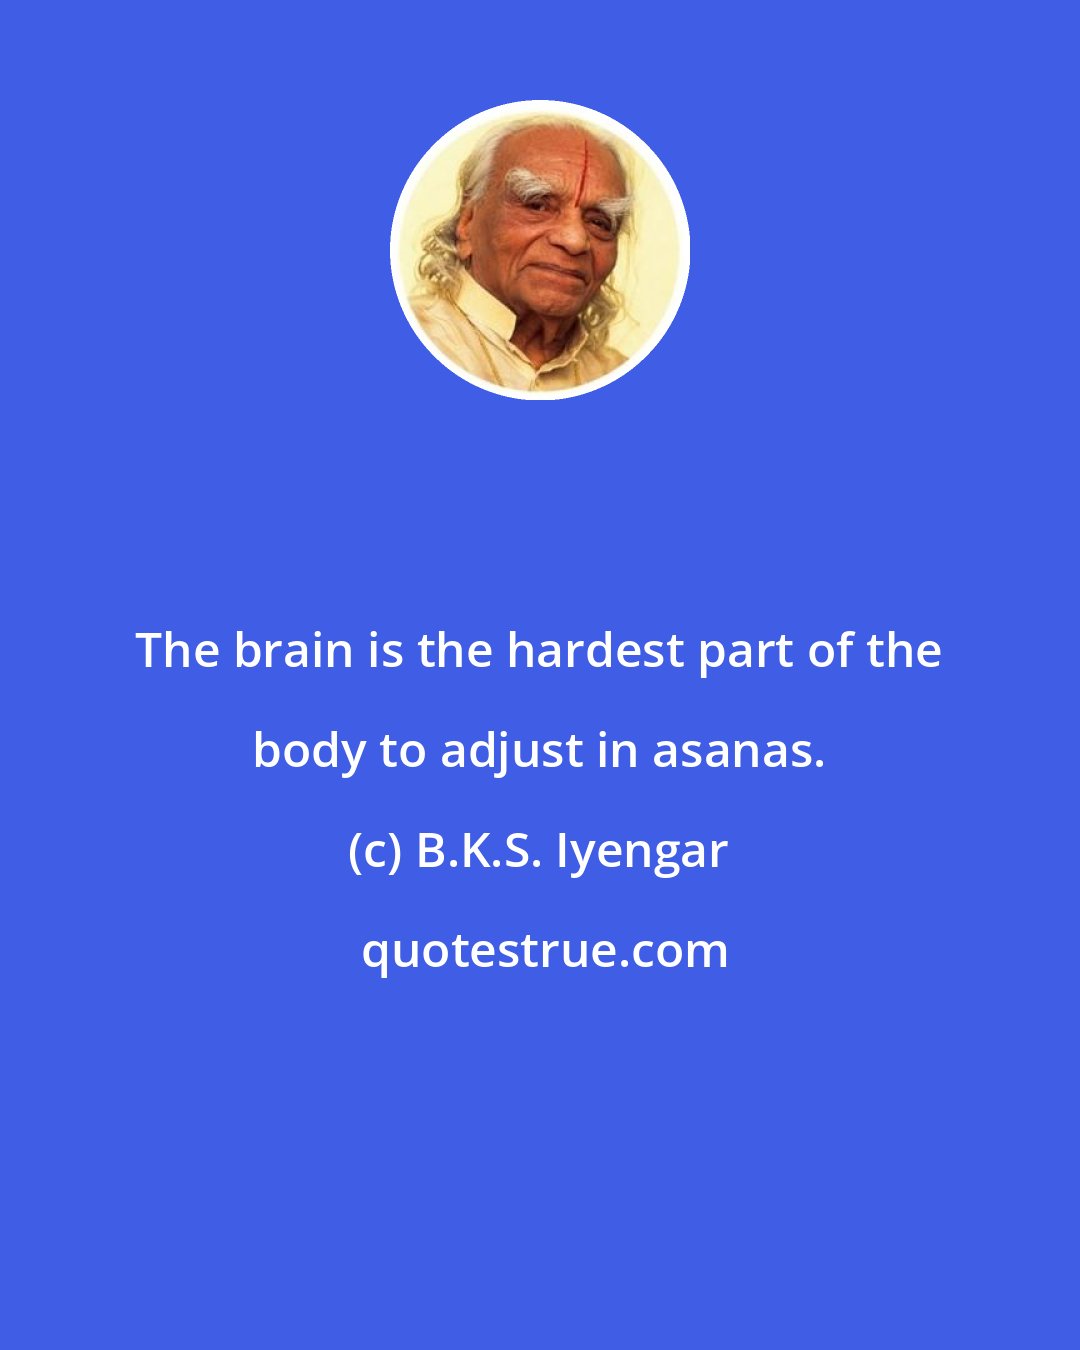 B.K.S. Iyengar: The brain is the hardest part of the body to adjust in asanas.